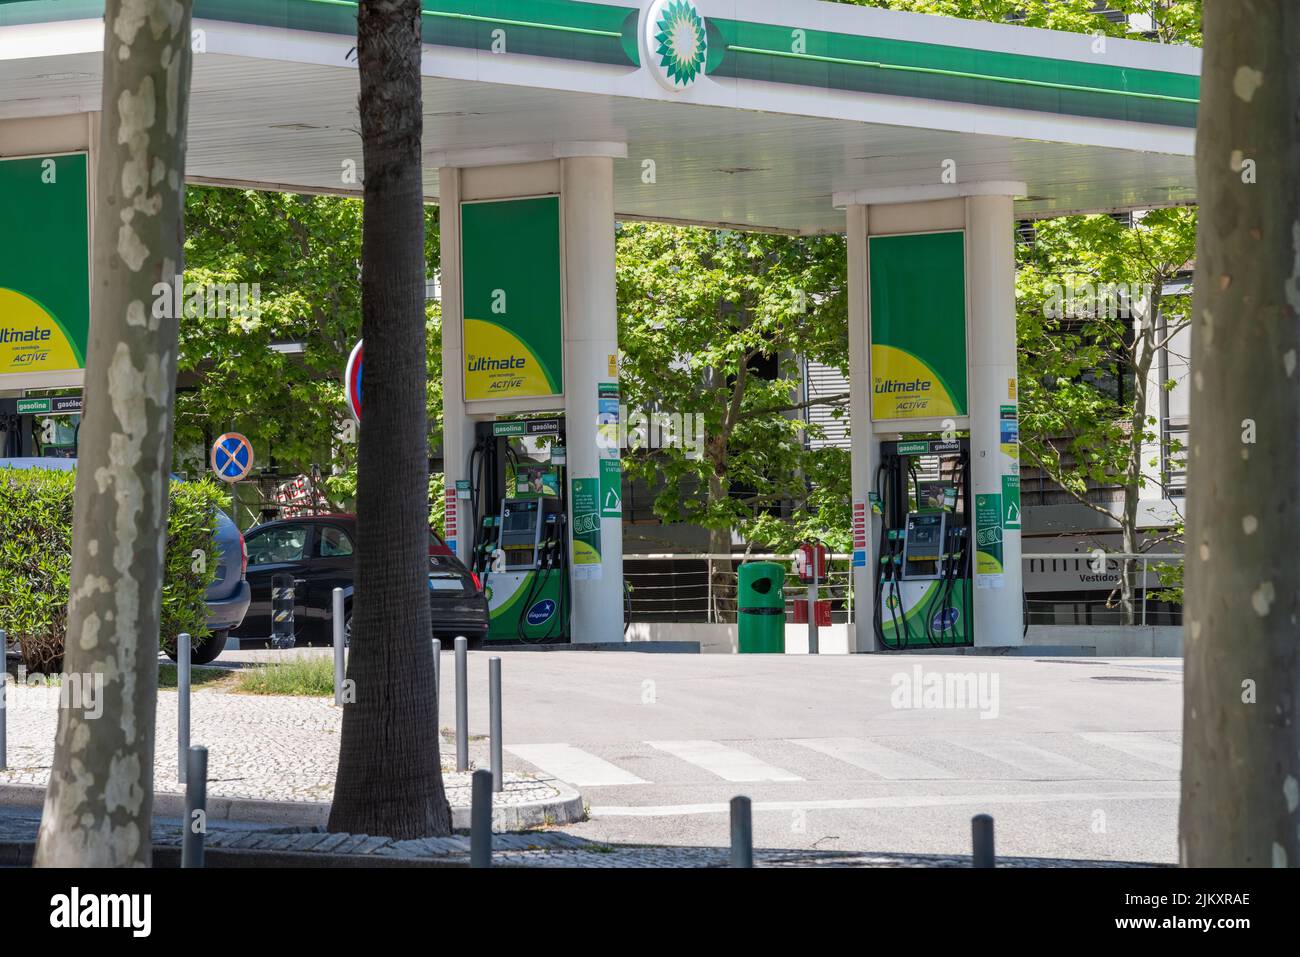 The BP petrol station with green and yellow design. Lisbon, Portugal Stock Photo